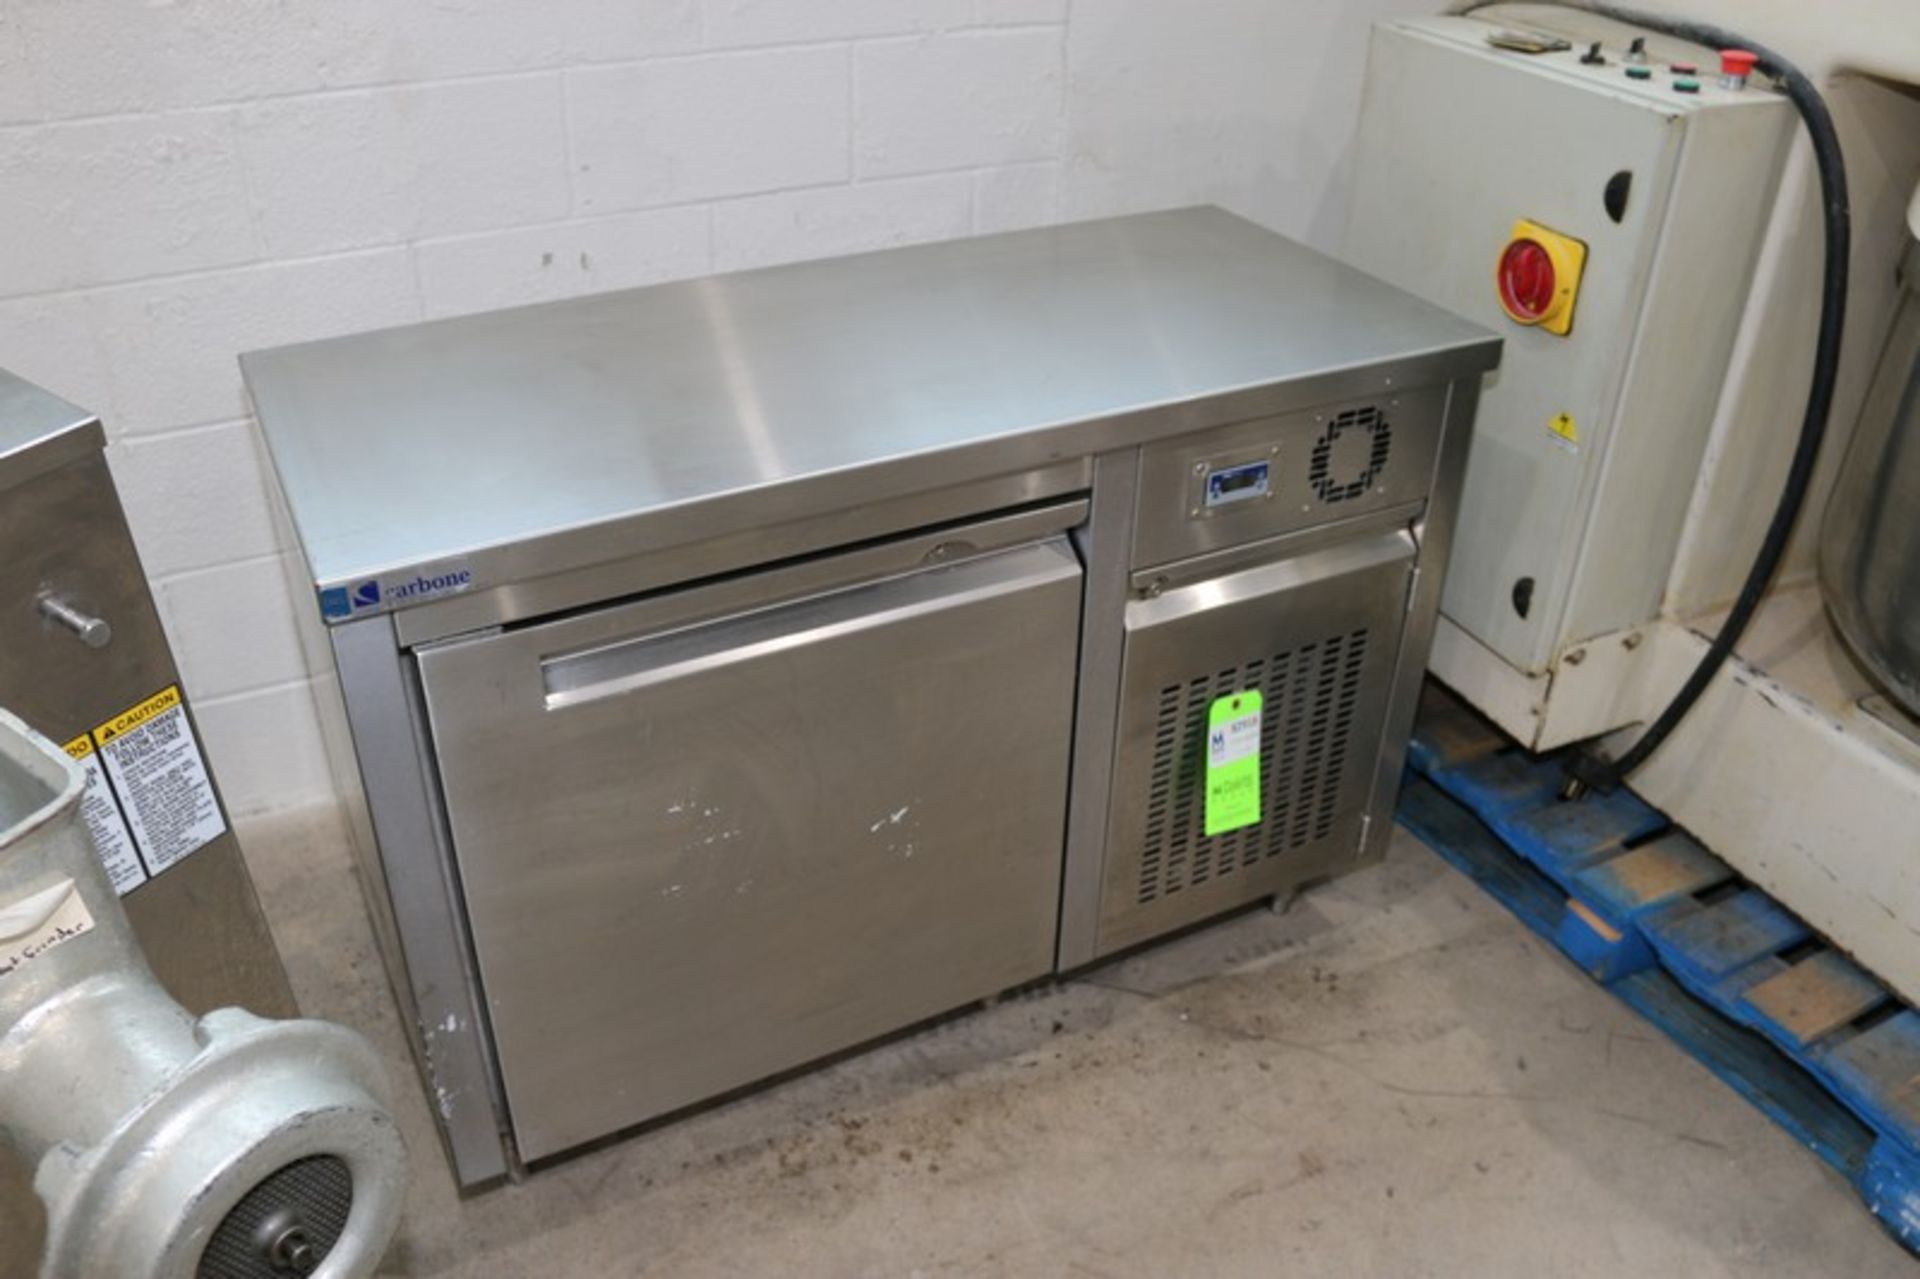 Carbone S/S Refrigerator Counter,with Bottom Refrigerator Compartment, Overall Dims.: Aprox. 48" L x - Bild 2 aus 4